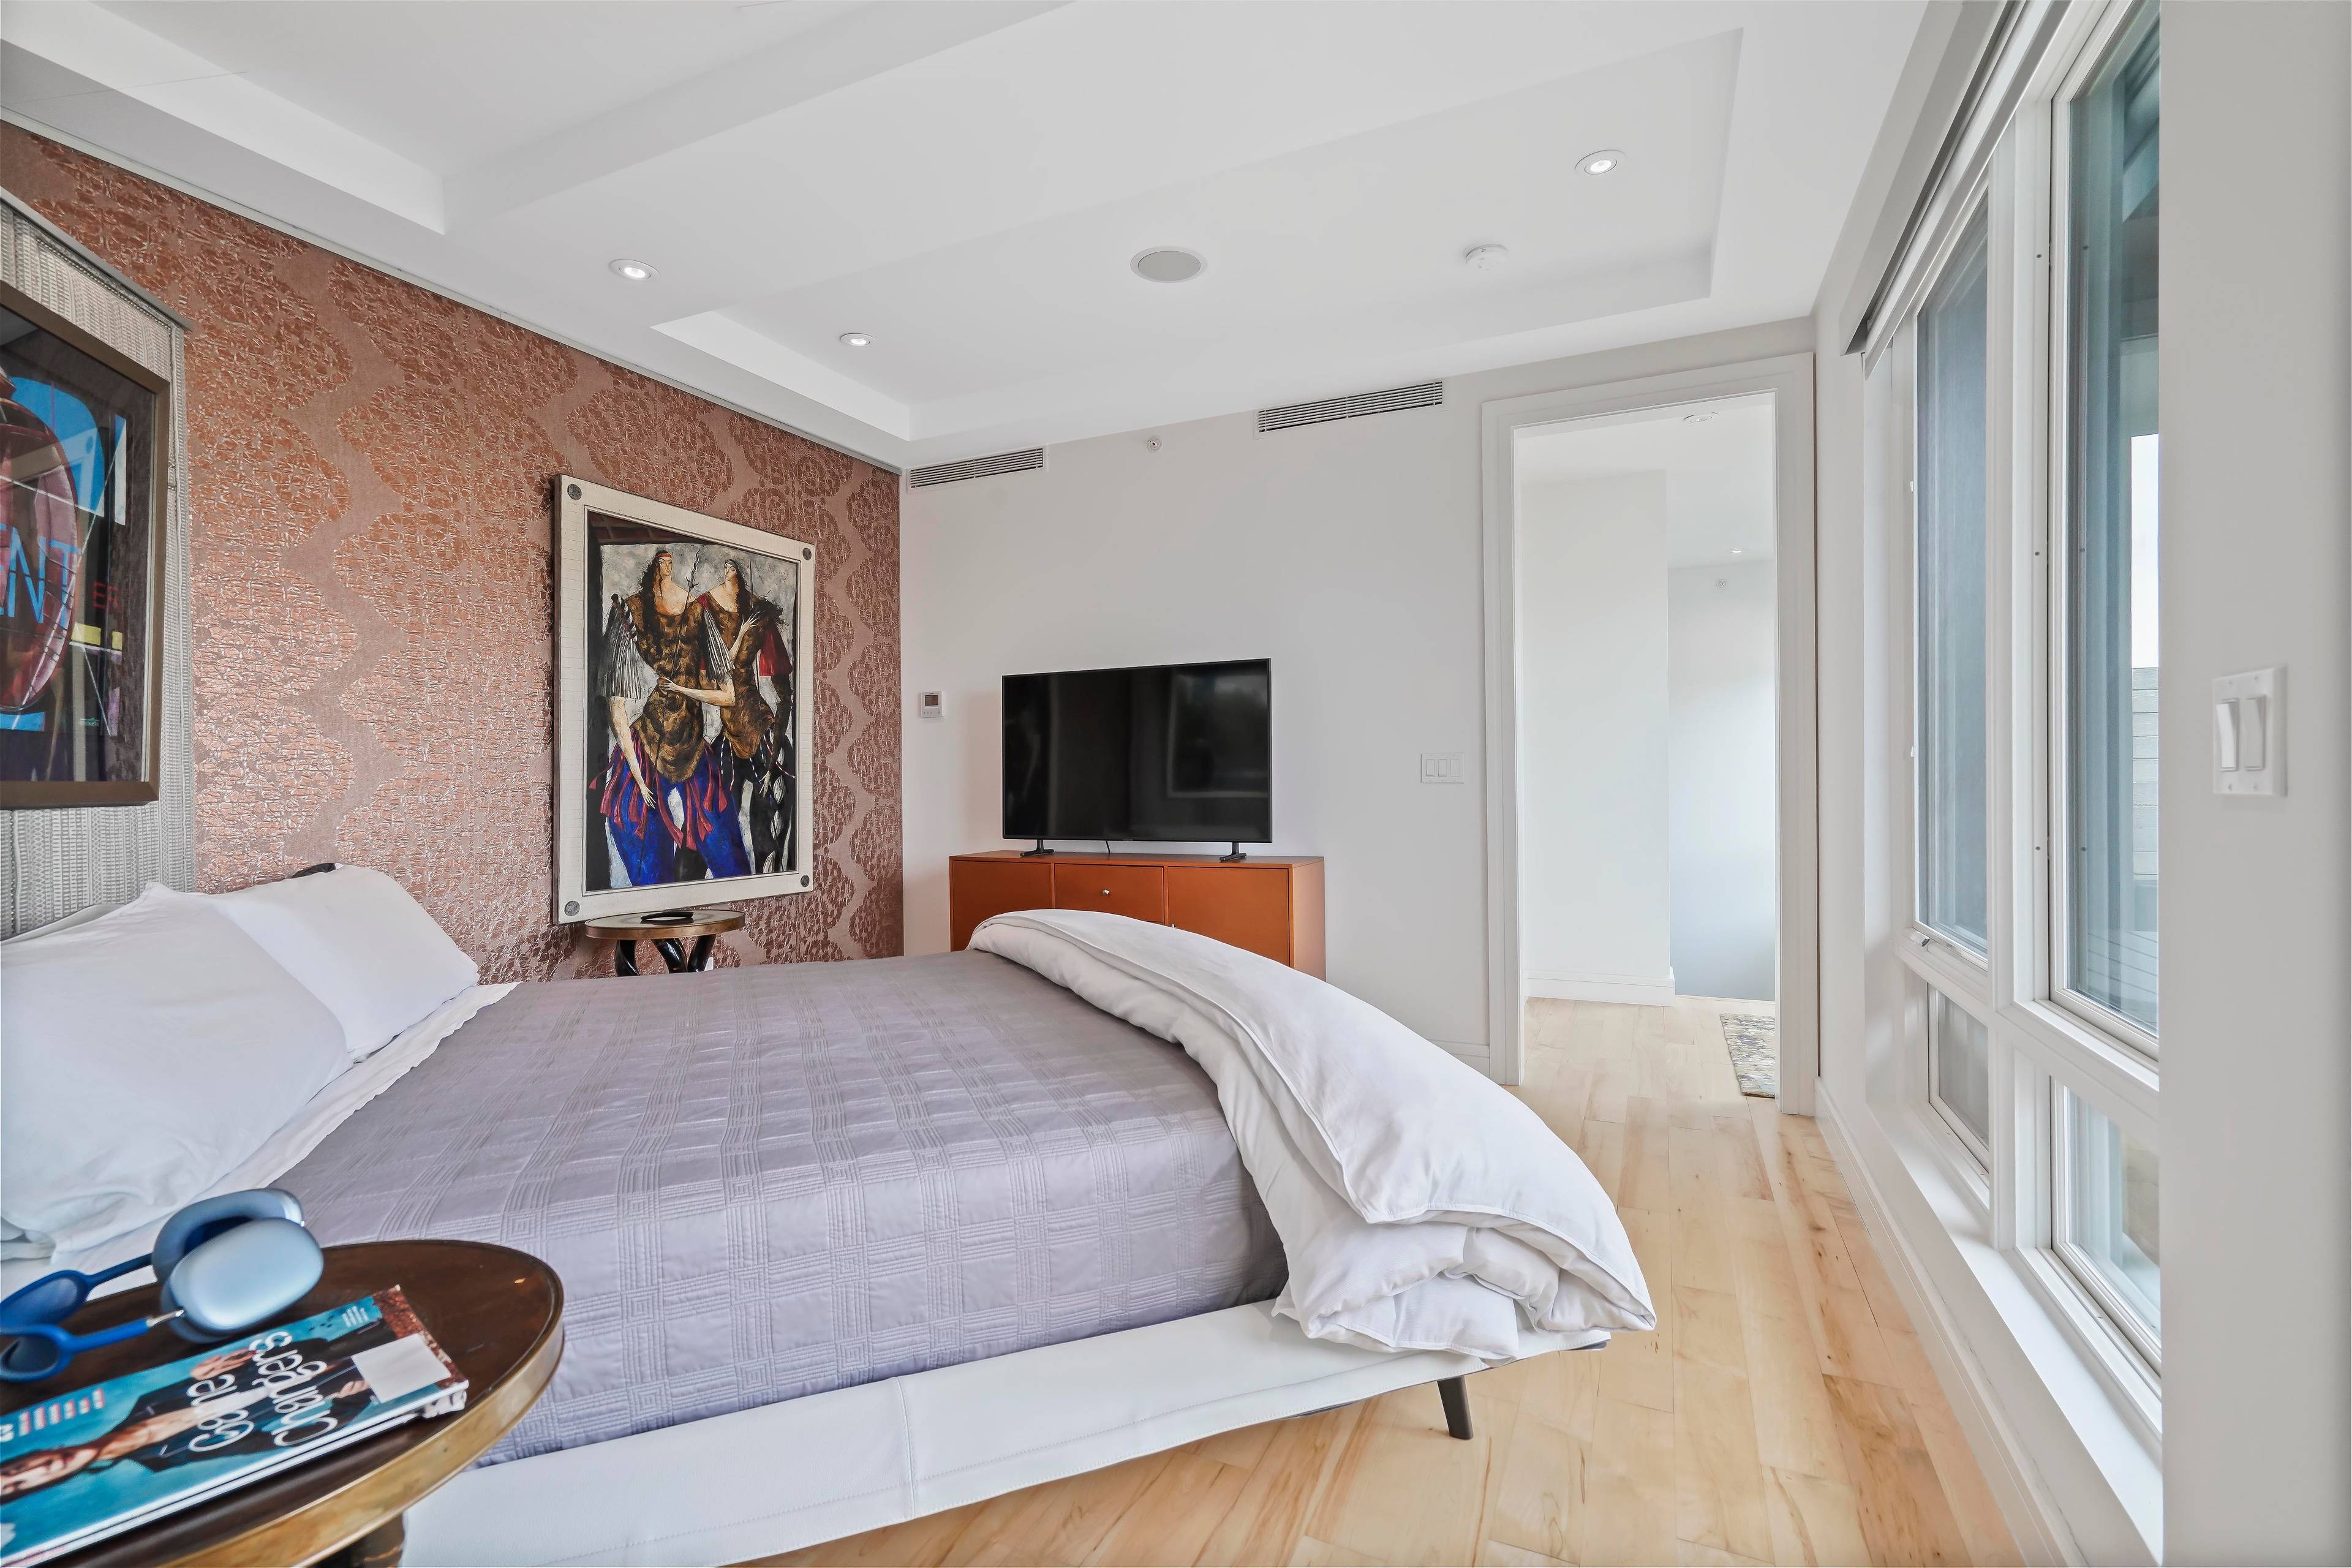 Stanton on Sixth is a collection of luxury residential units in tranquil and desirable Greenwood Heights, just blocks from the South of Park Slope.